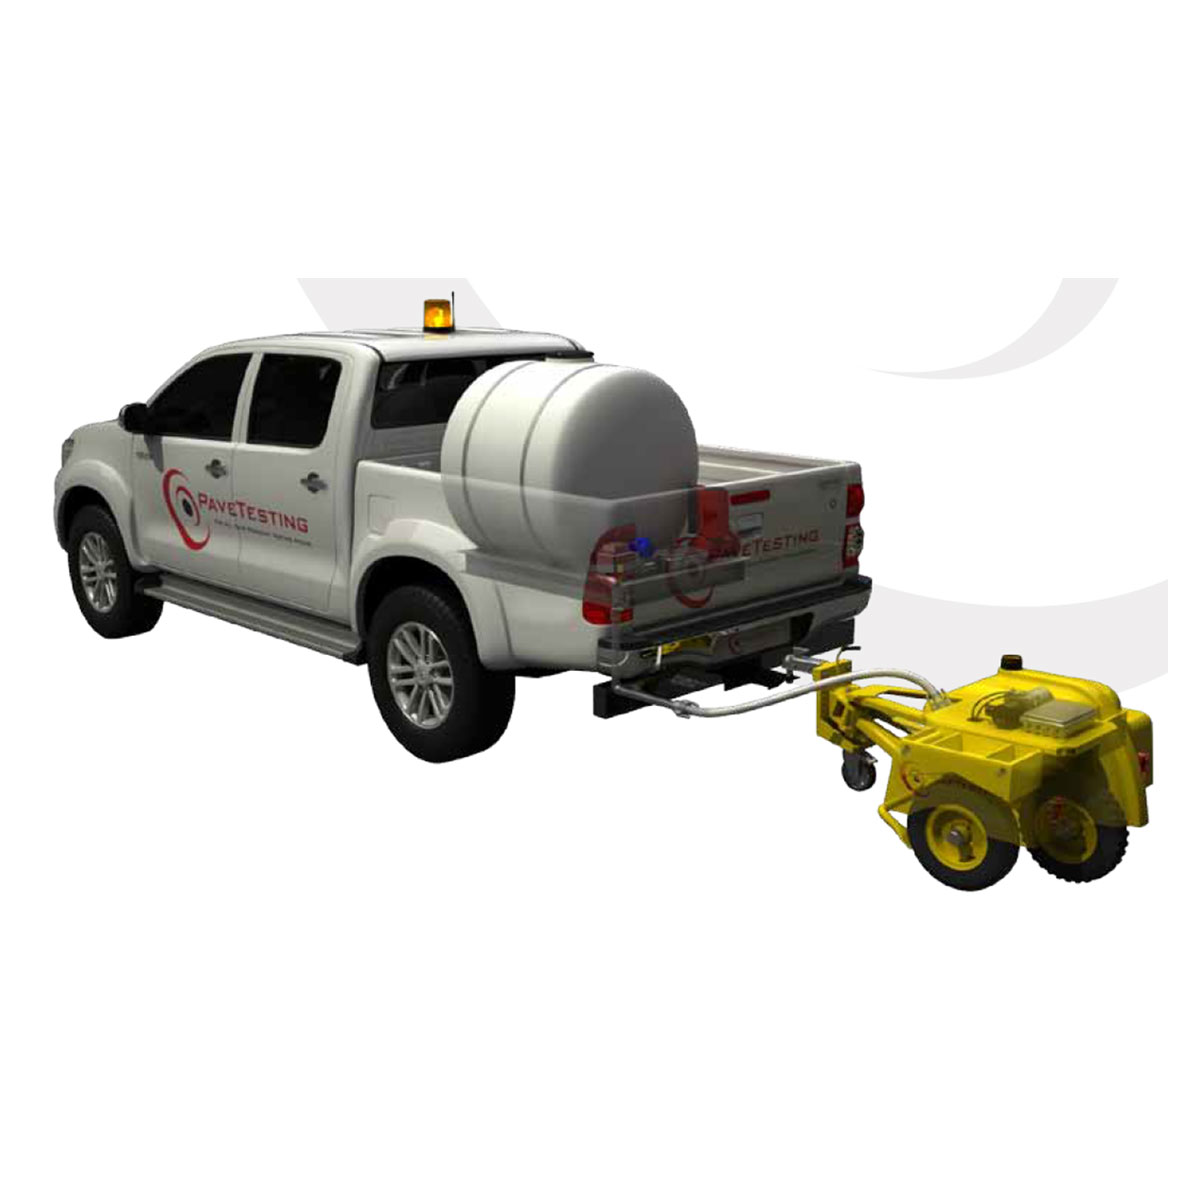 Mobile Testing Lab in Pickup Mounted for Field